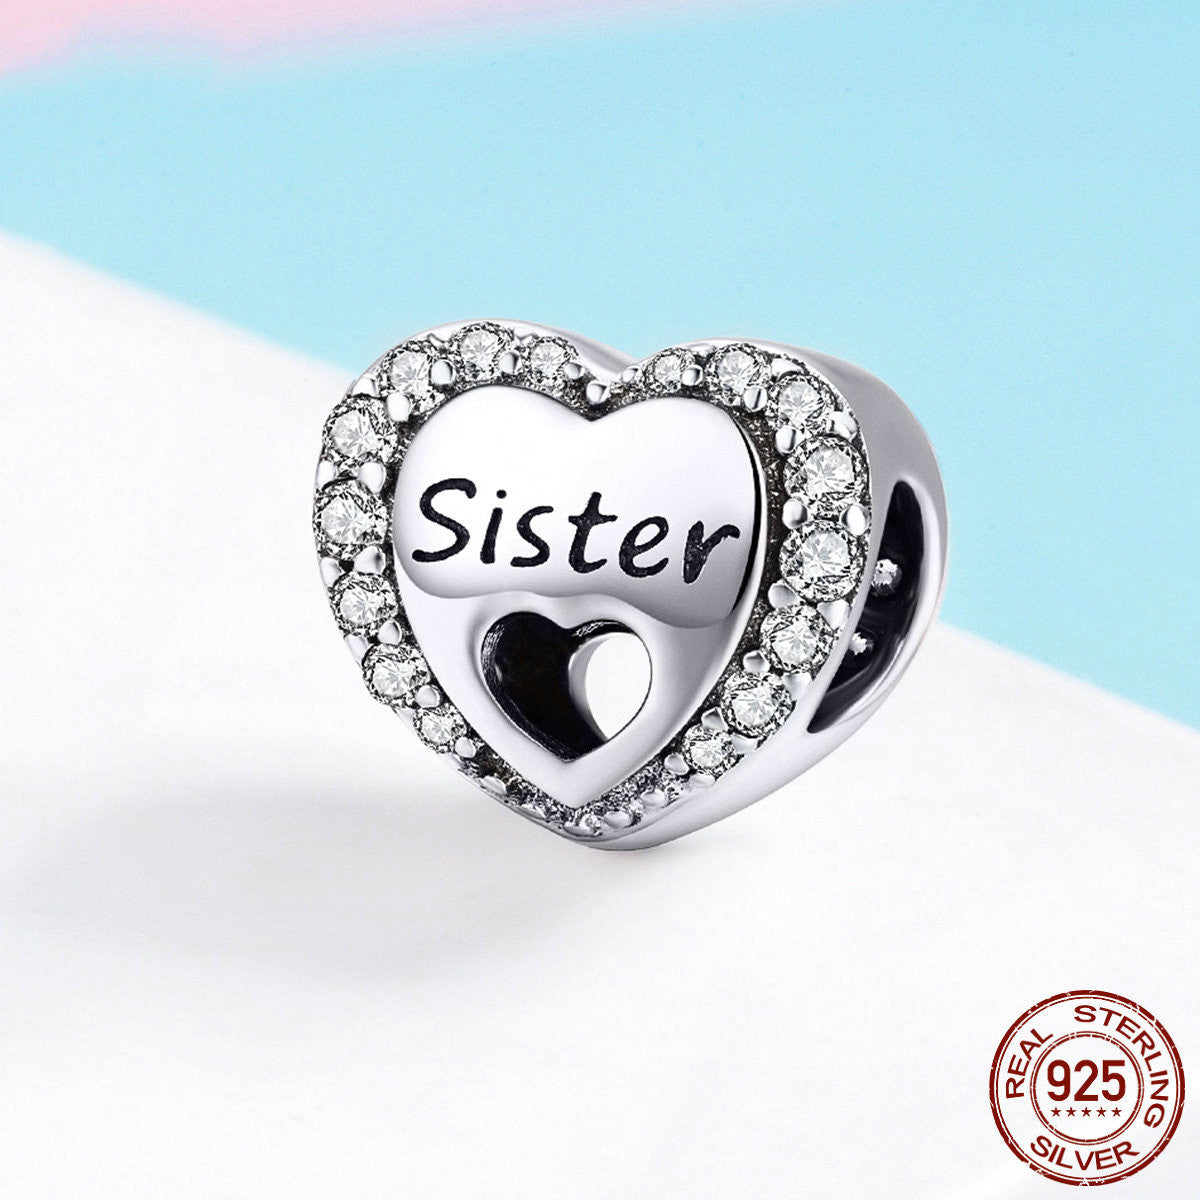 Sister Sterling Silver Charm